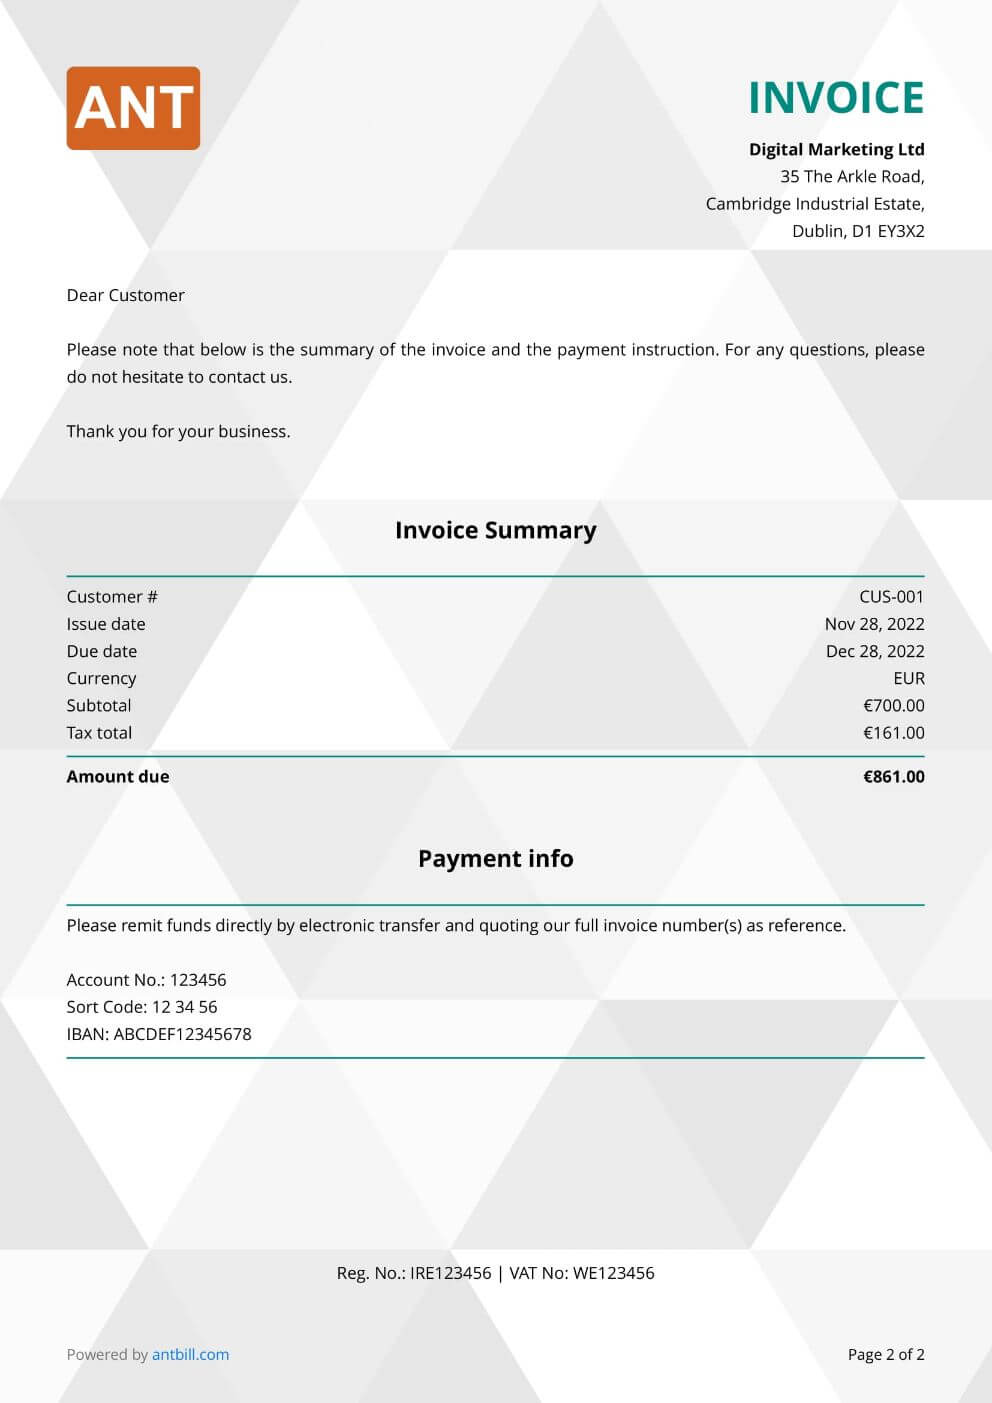 IT Services Invoice Template - modern